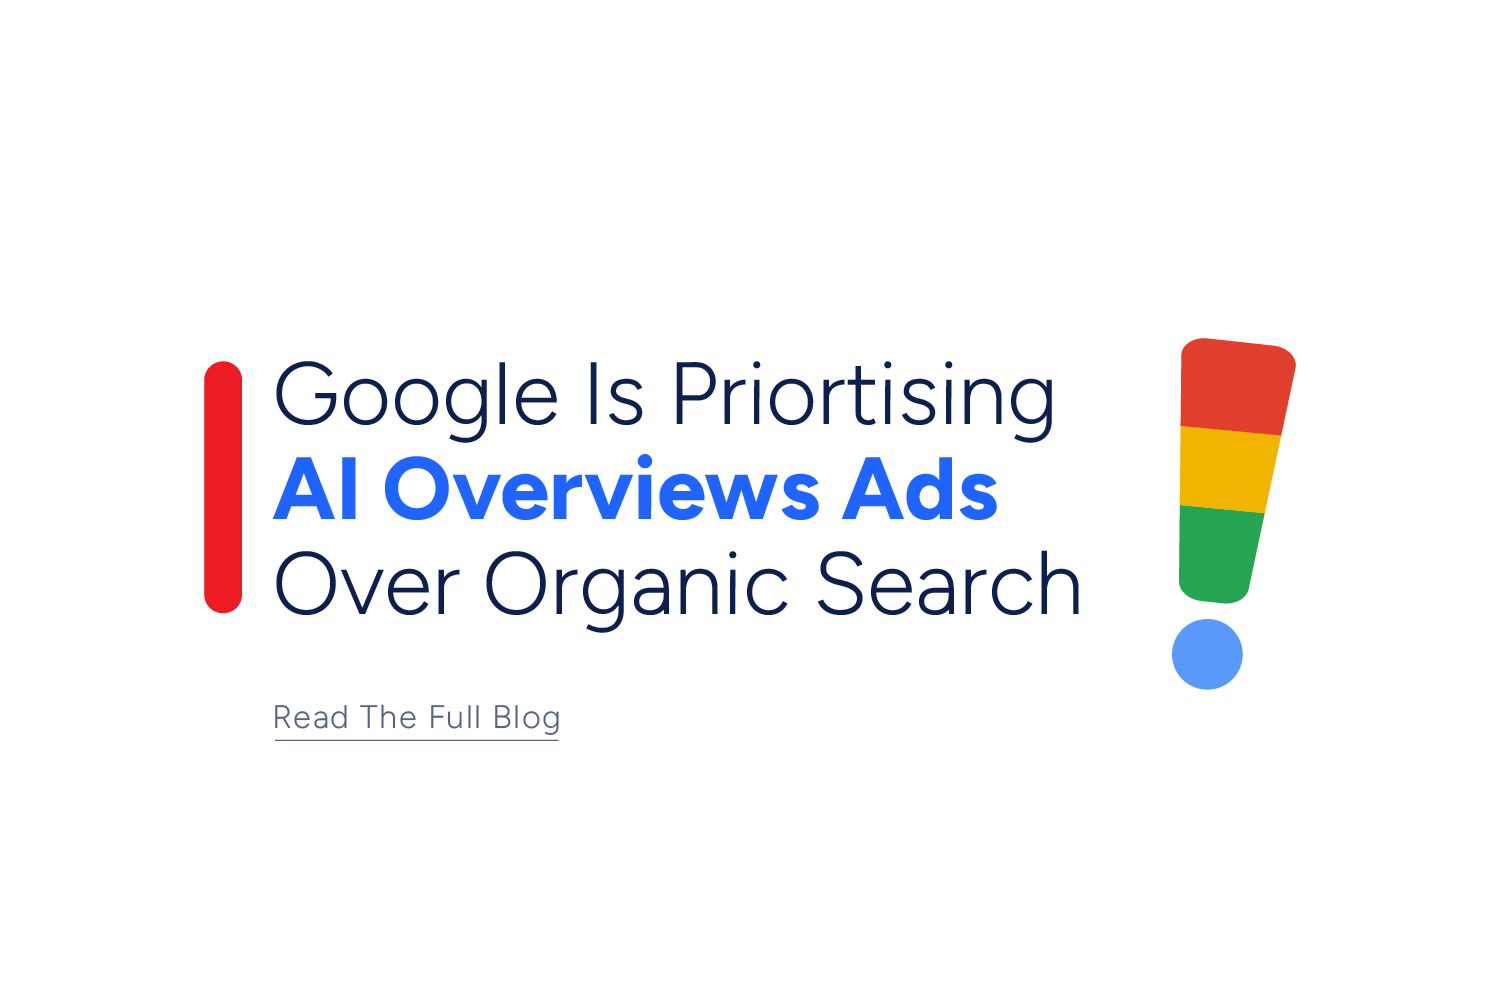 Get Rid of Google Search’s AI Overviews